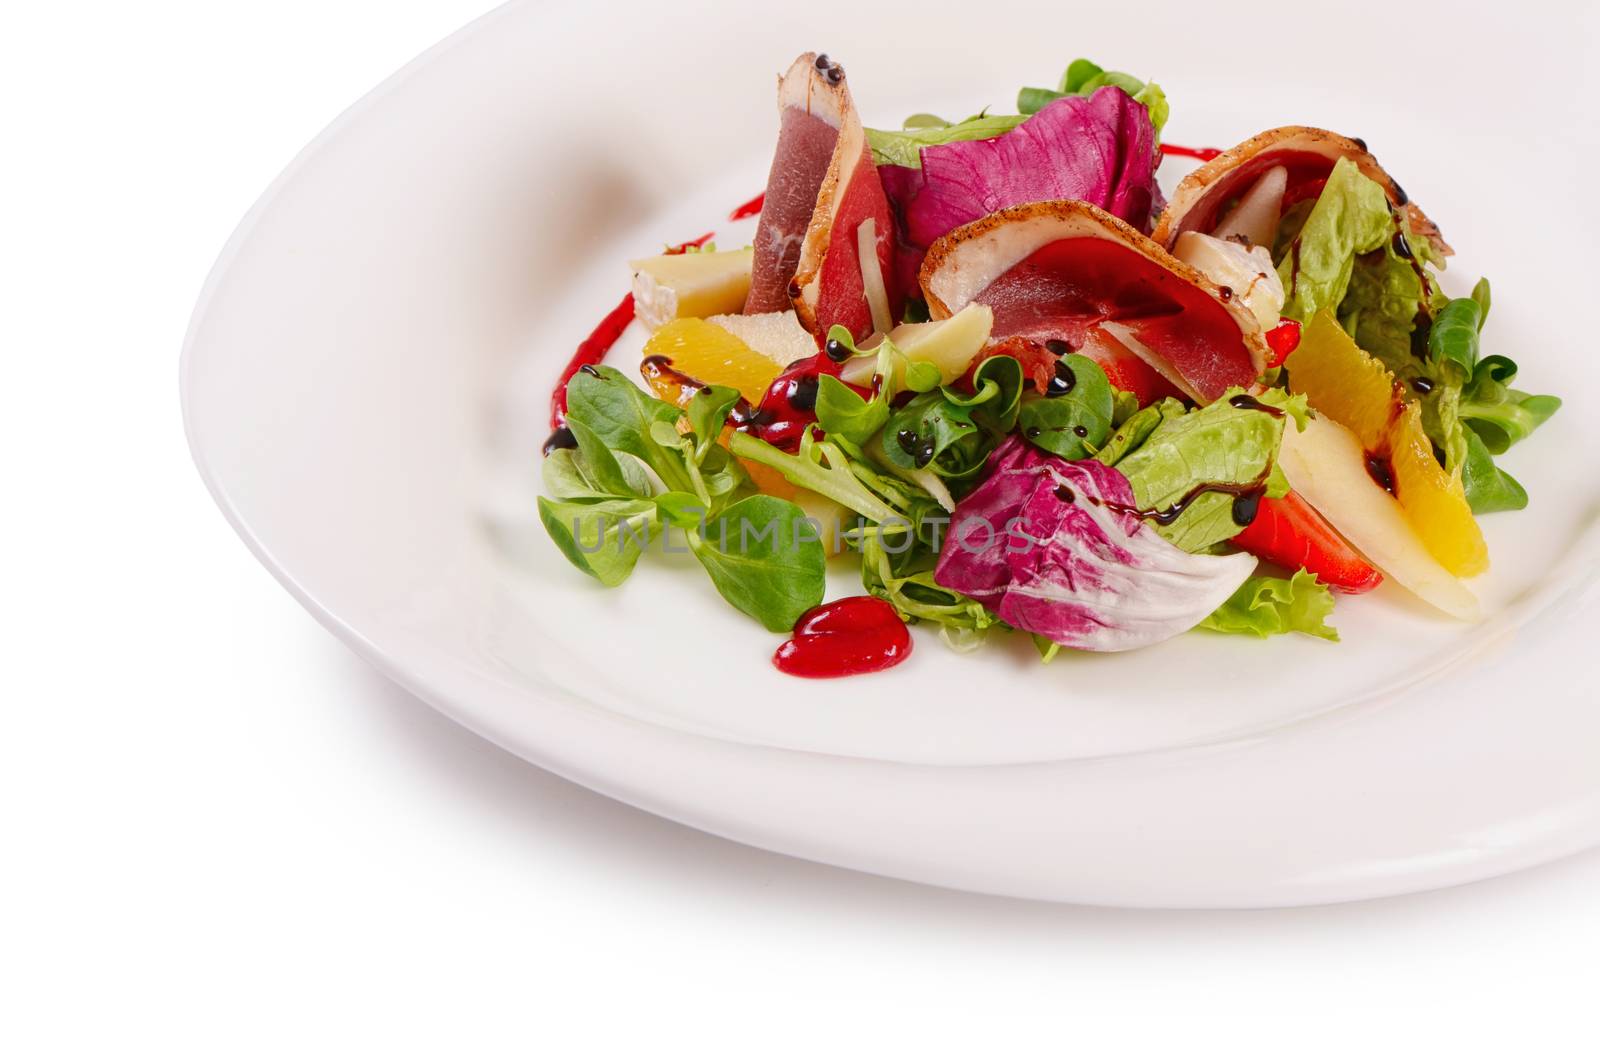 The salad with smoked duck breast close up by SvetaVo